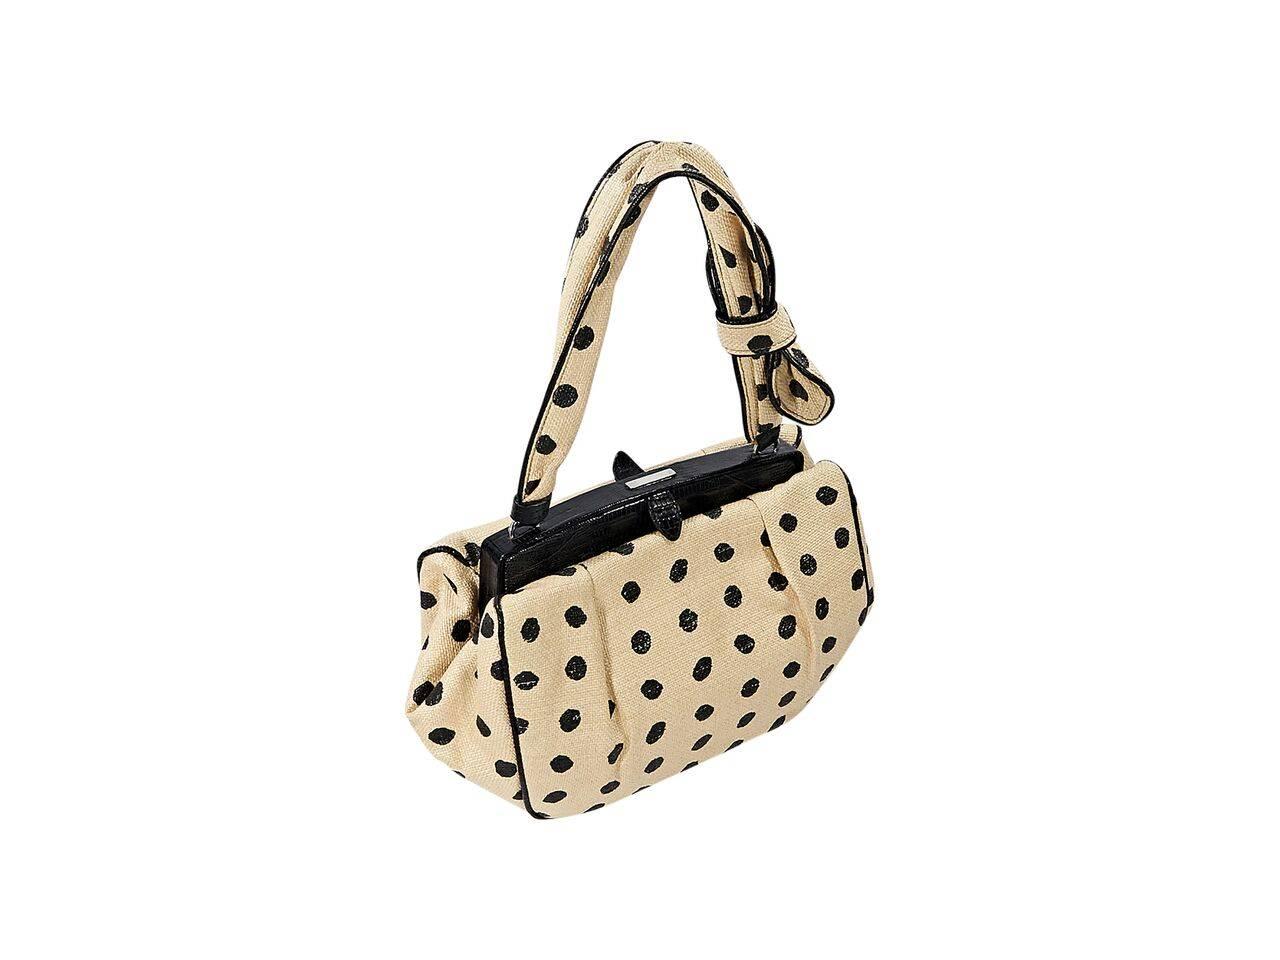 Product details:  Tan and black polka-dot raffia shoulder bag by Alaia.  Trimmed with black lizard.  Single shoulder strap.  Top push-lock closure.  Lined interior with inner flap pocket.  Silvertone hardware.  12"L x 7"H x 4"D. 